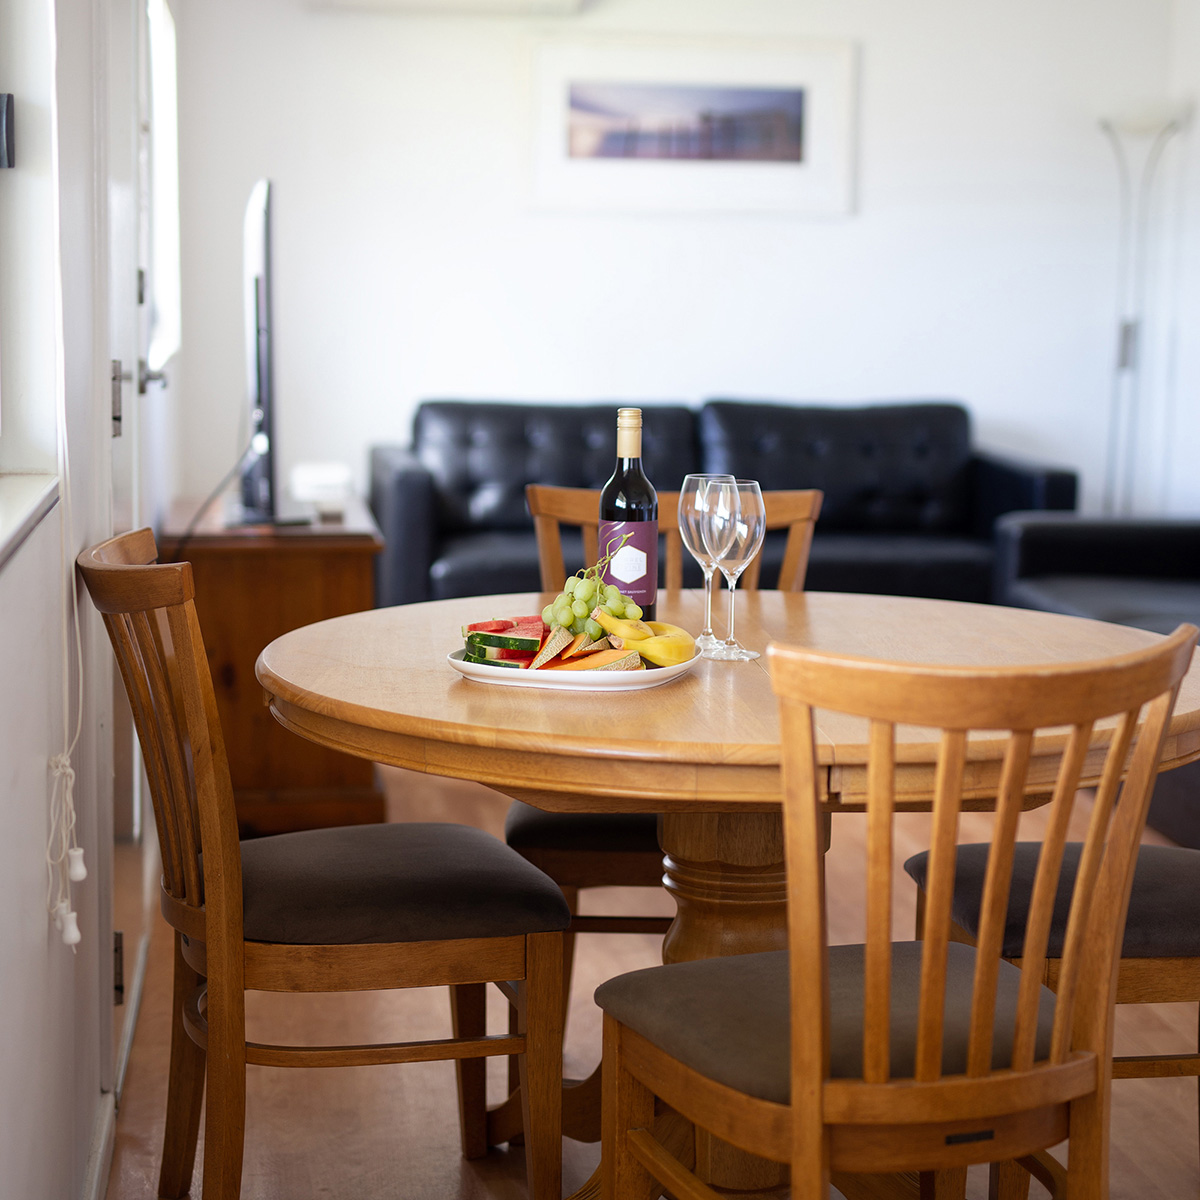 Busselton Accommodation Chalets | Busselton Holiday Village | Margaret River. Come & enjoy the relaxed Busselton lifestyle in our self contained Chalets